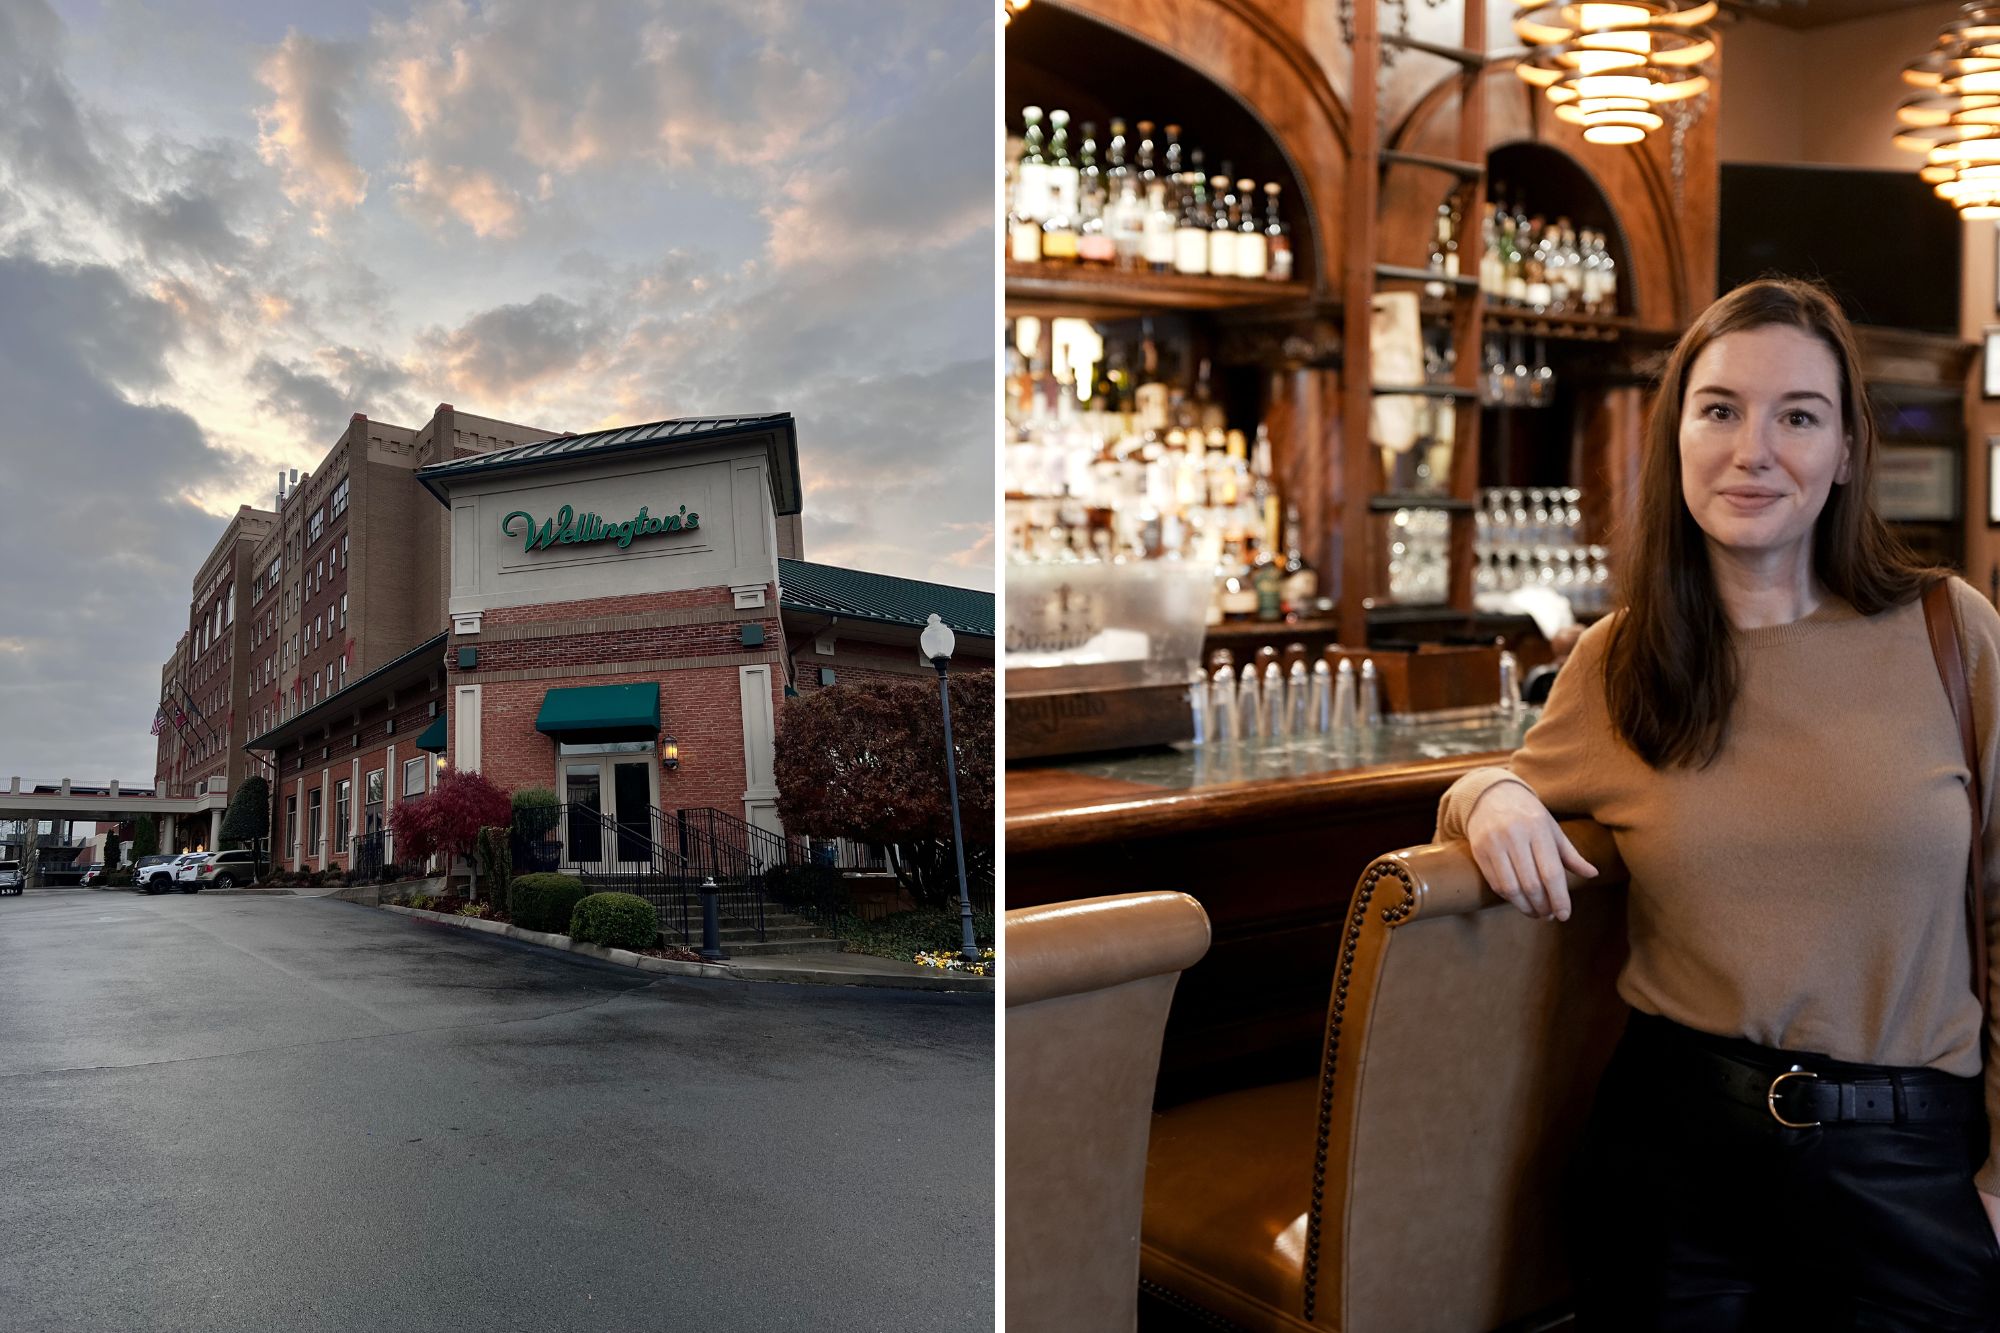 Two images: exterior of Wellington's Restaurant, and Alyssa standing at the bar